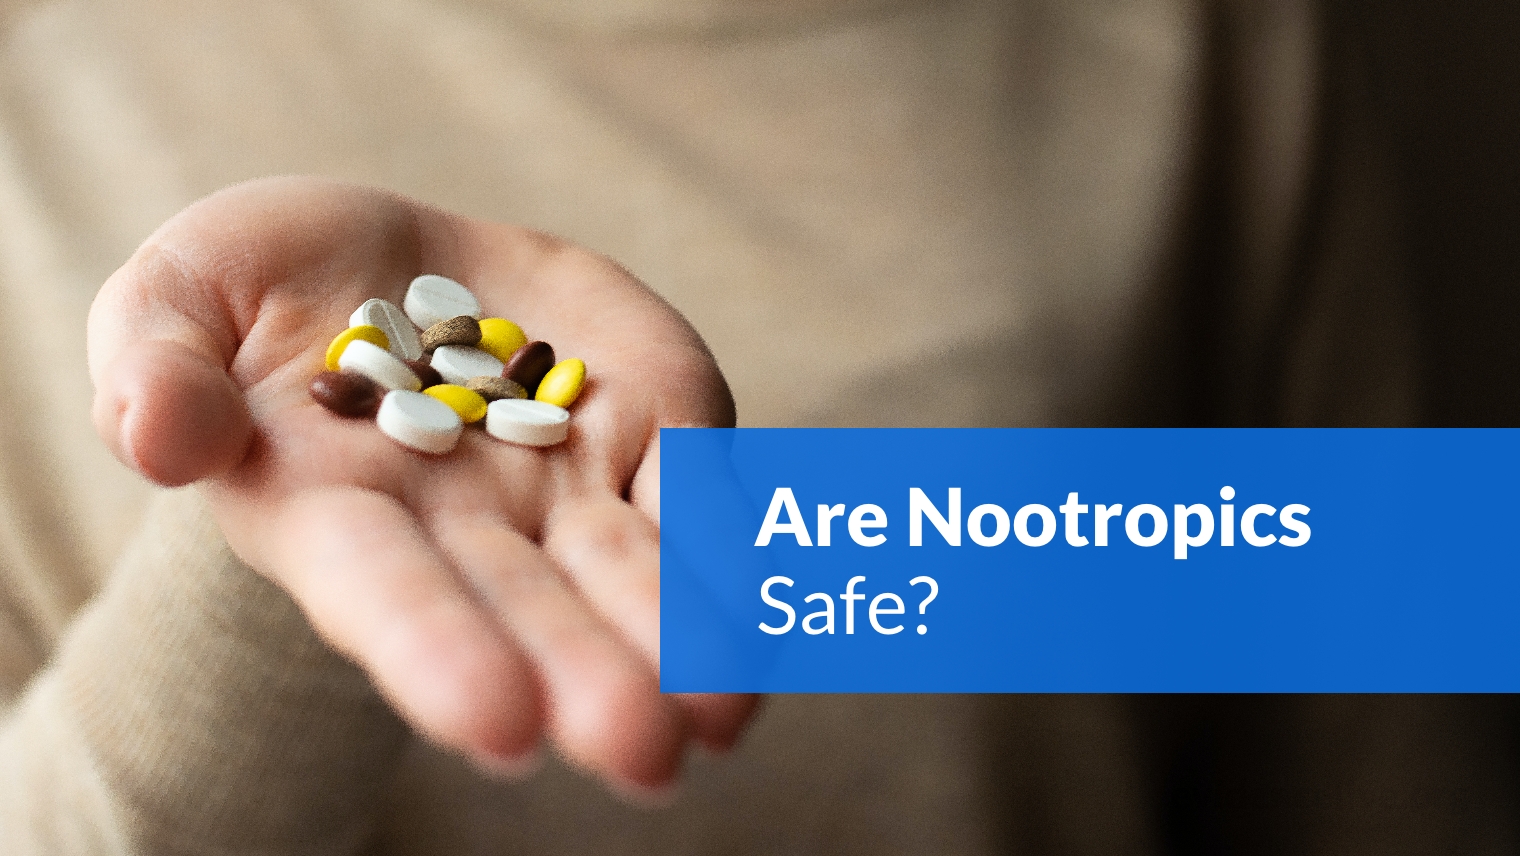 Are Nootropics Safe? What Are The Risks and Long-Term Effects?